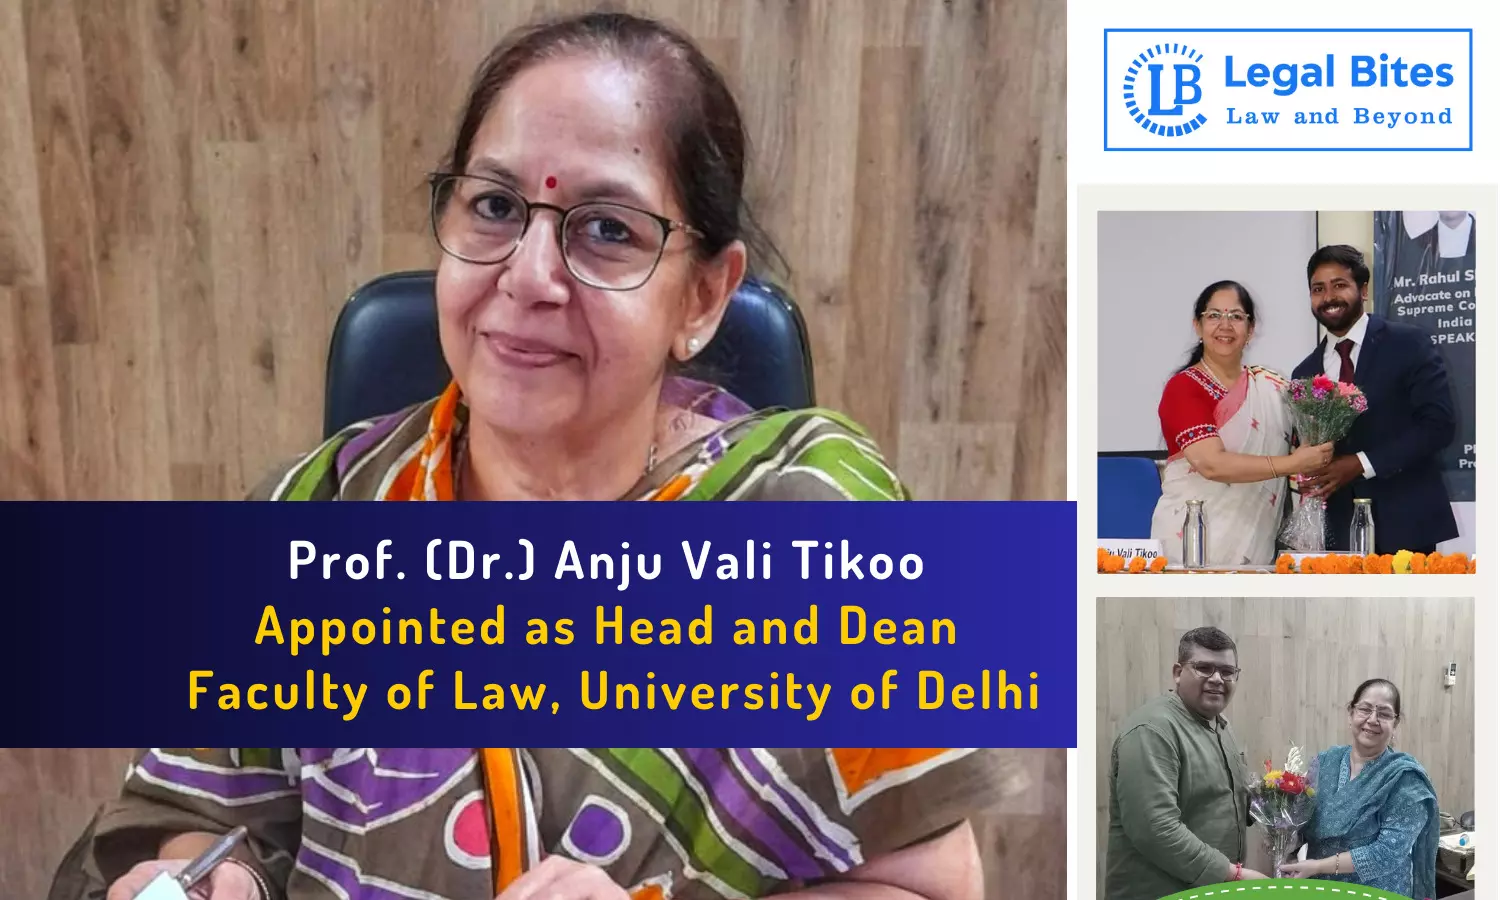 Prof. (Dr.) Anju Vali Tikoo Appointed as Head and Dean of Faculty of Law, University of Delhi